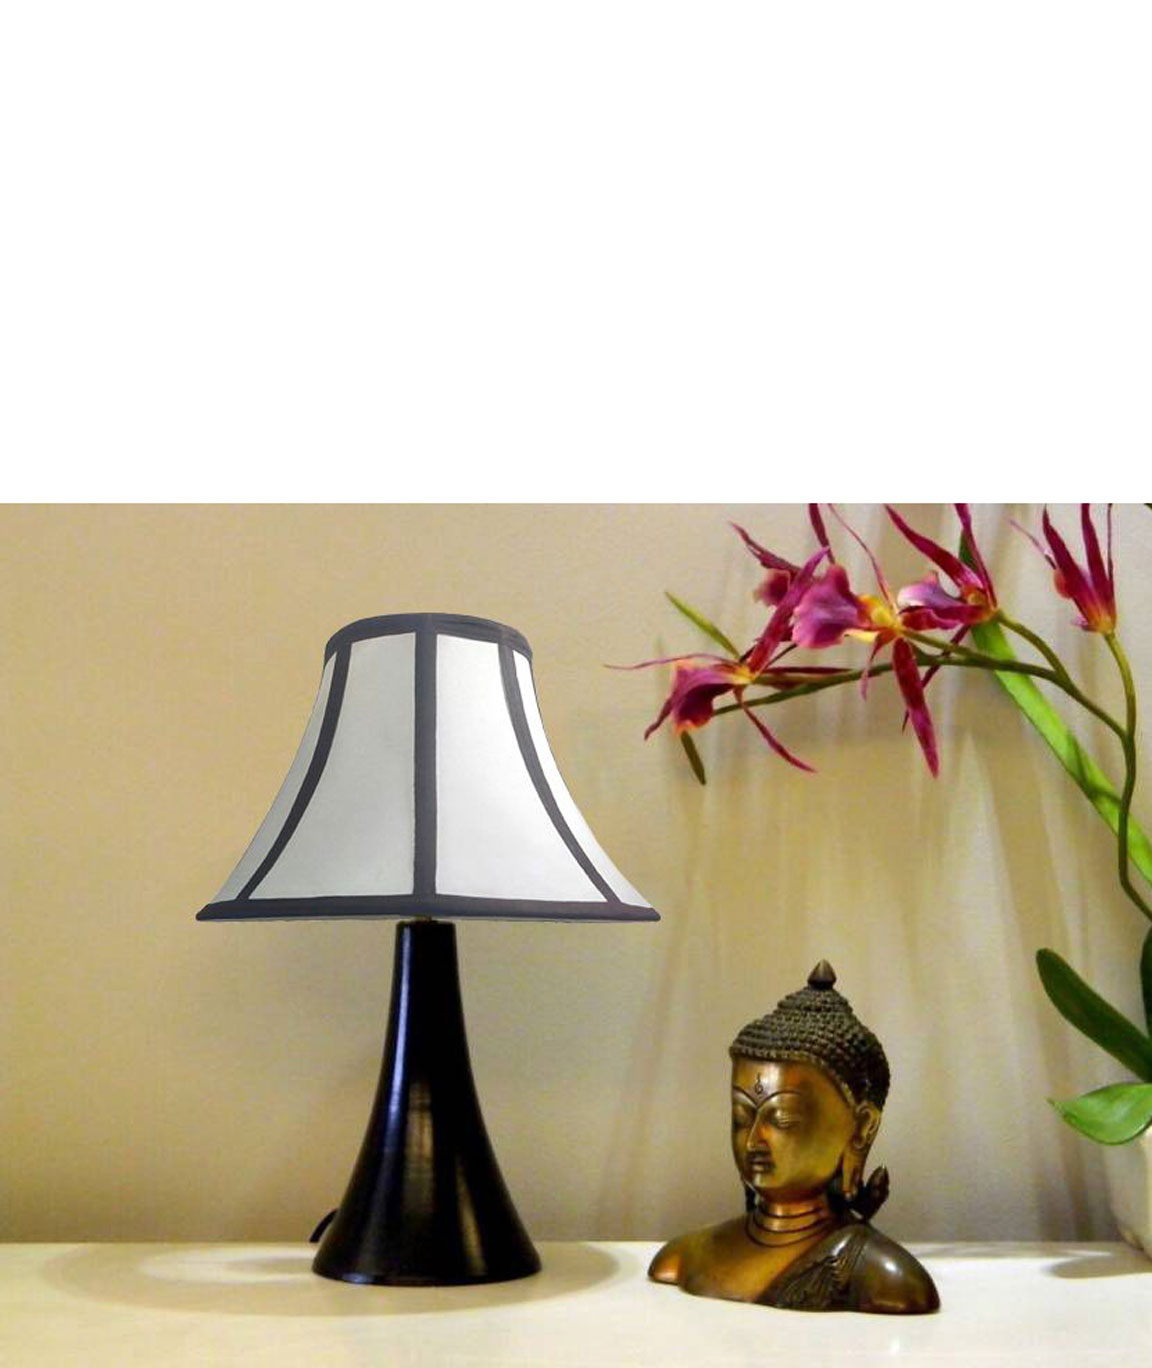 RDC Black Conical Stand Table Lamp with 10 Inches Round Slanting Cream with Brown Border Lamp Shade